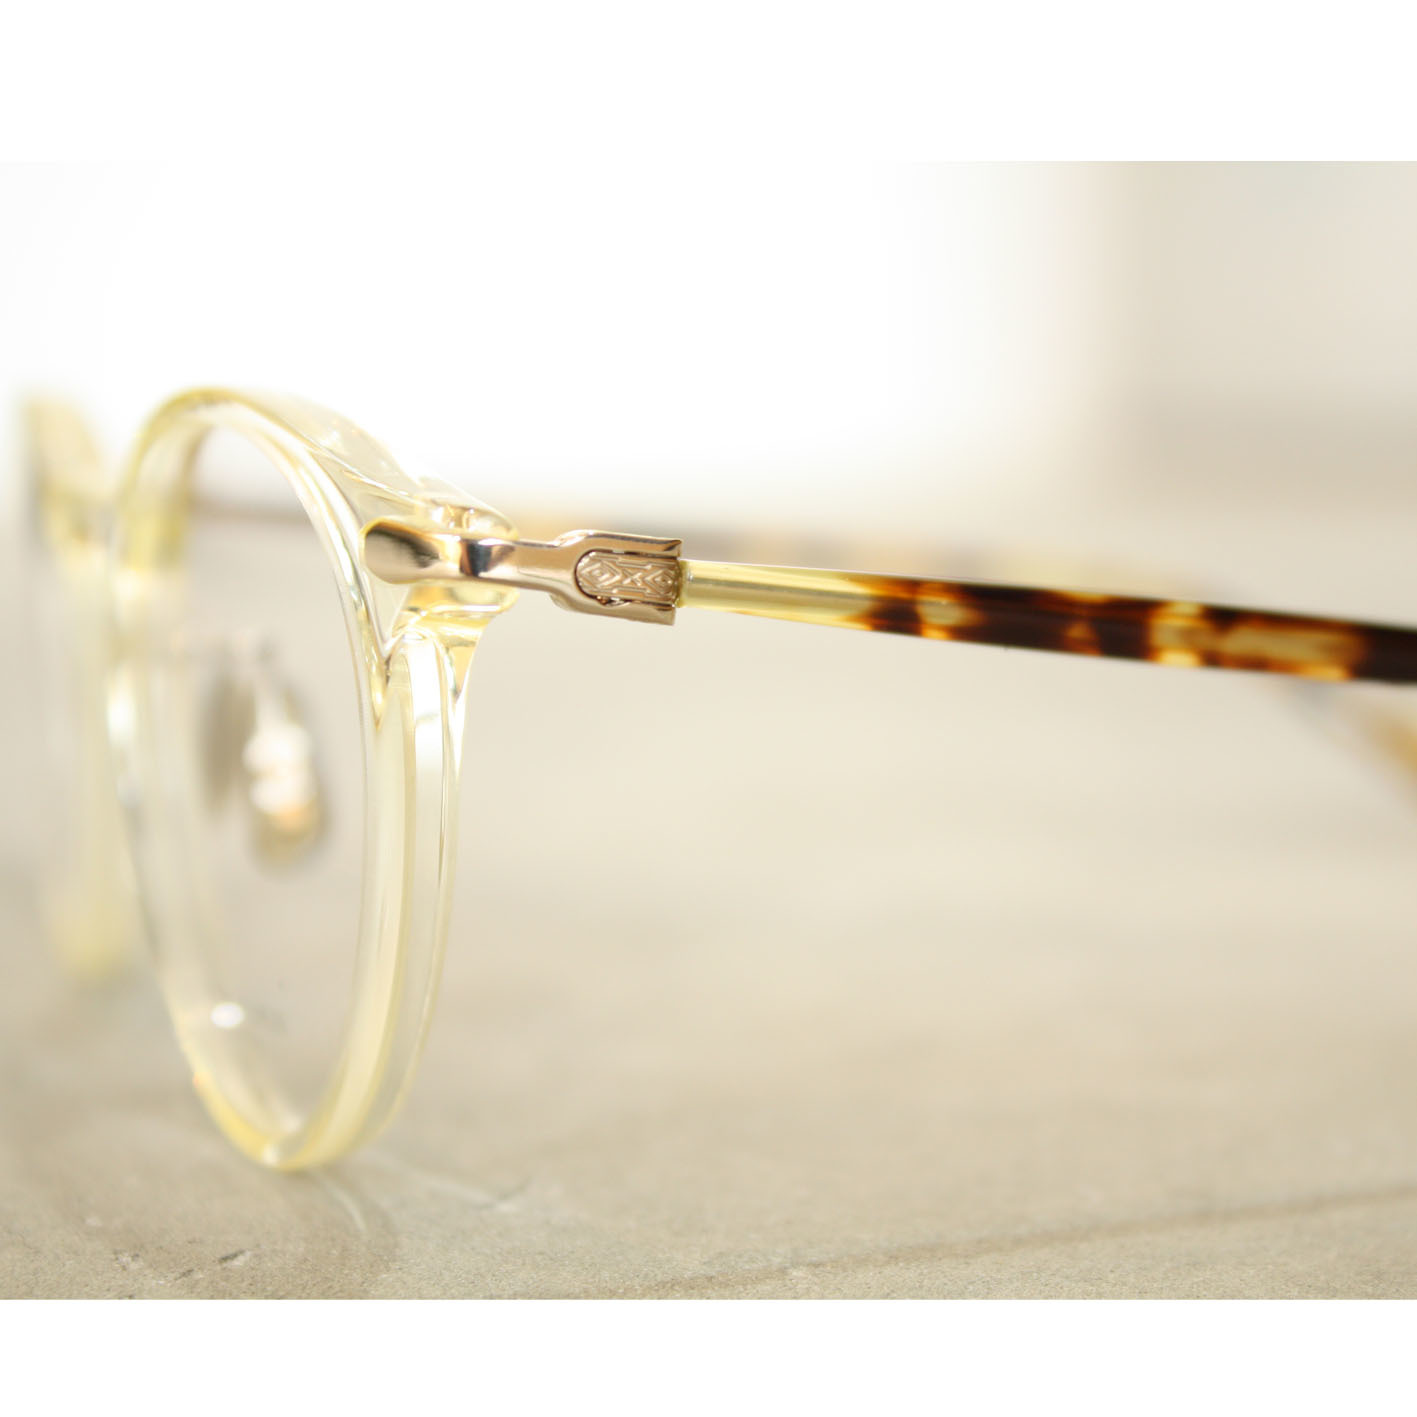 OLIVER PEOPLES 2016 NEW ARRIVAL_f0208675_16272791.jpg